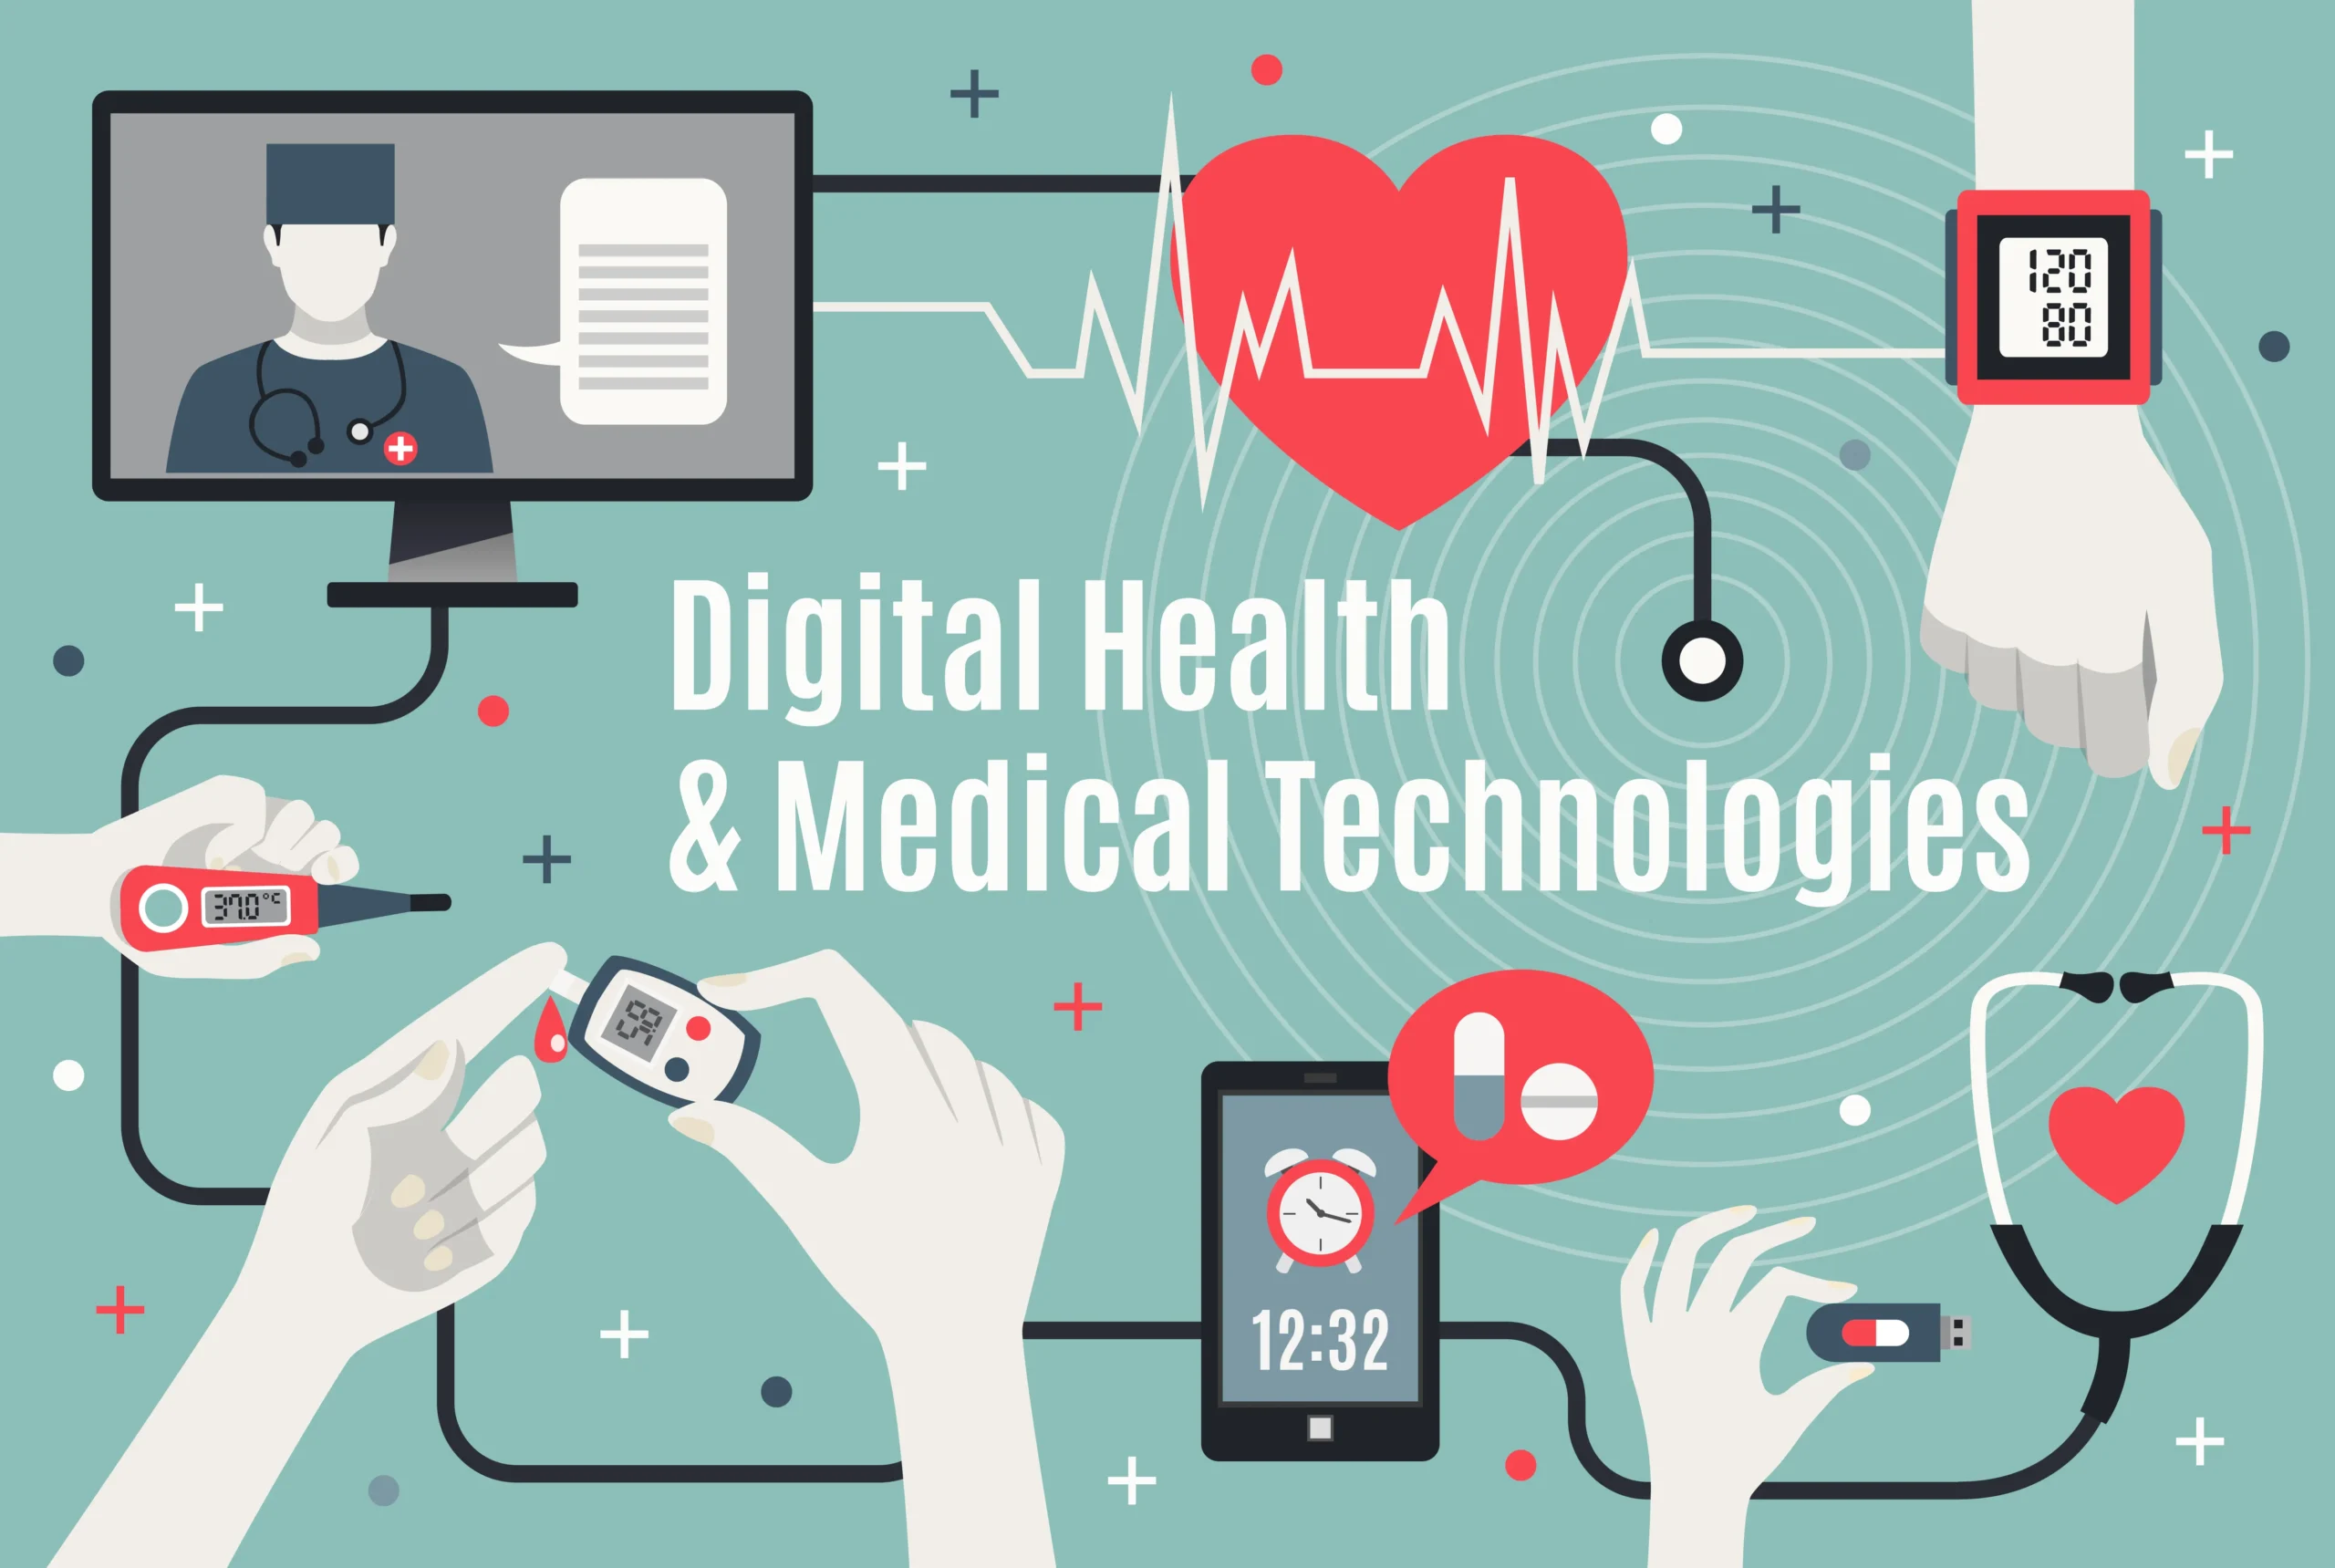 Telecommunications in healthcare